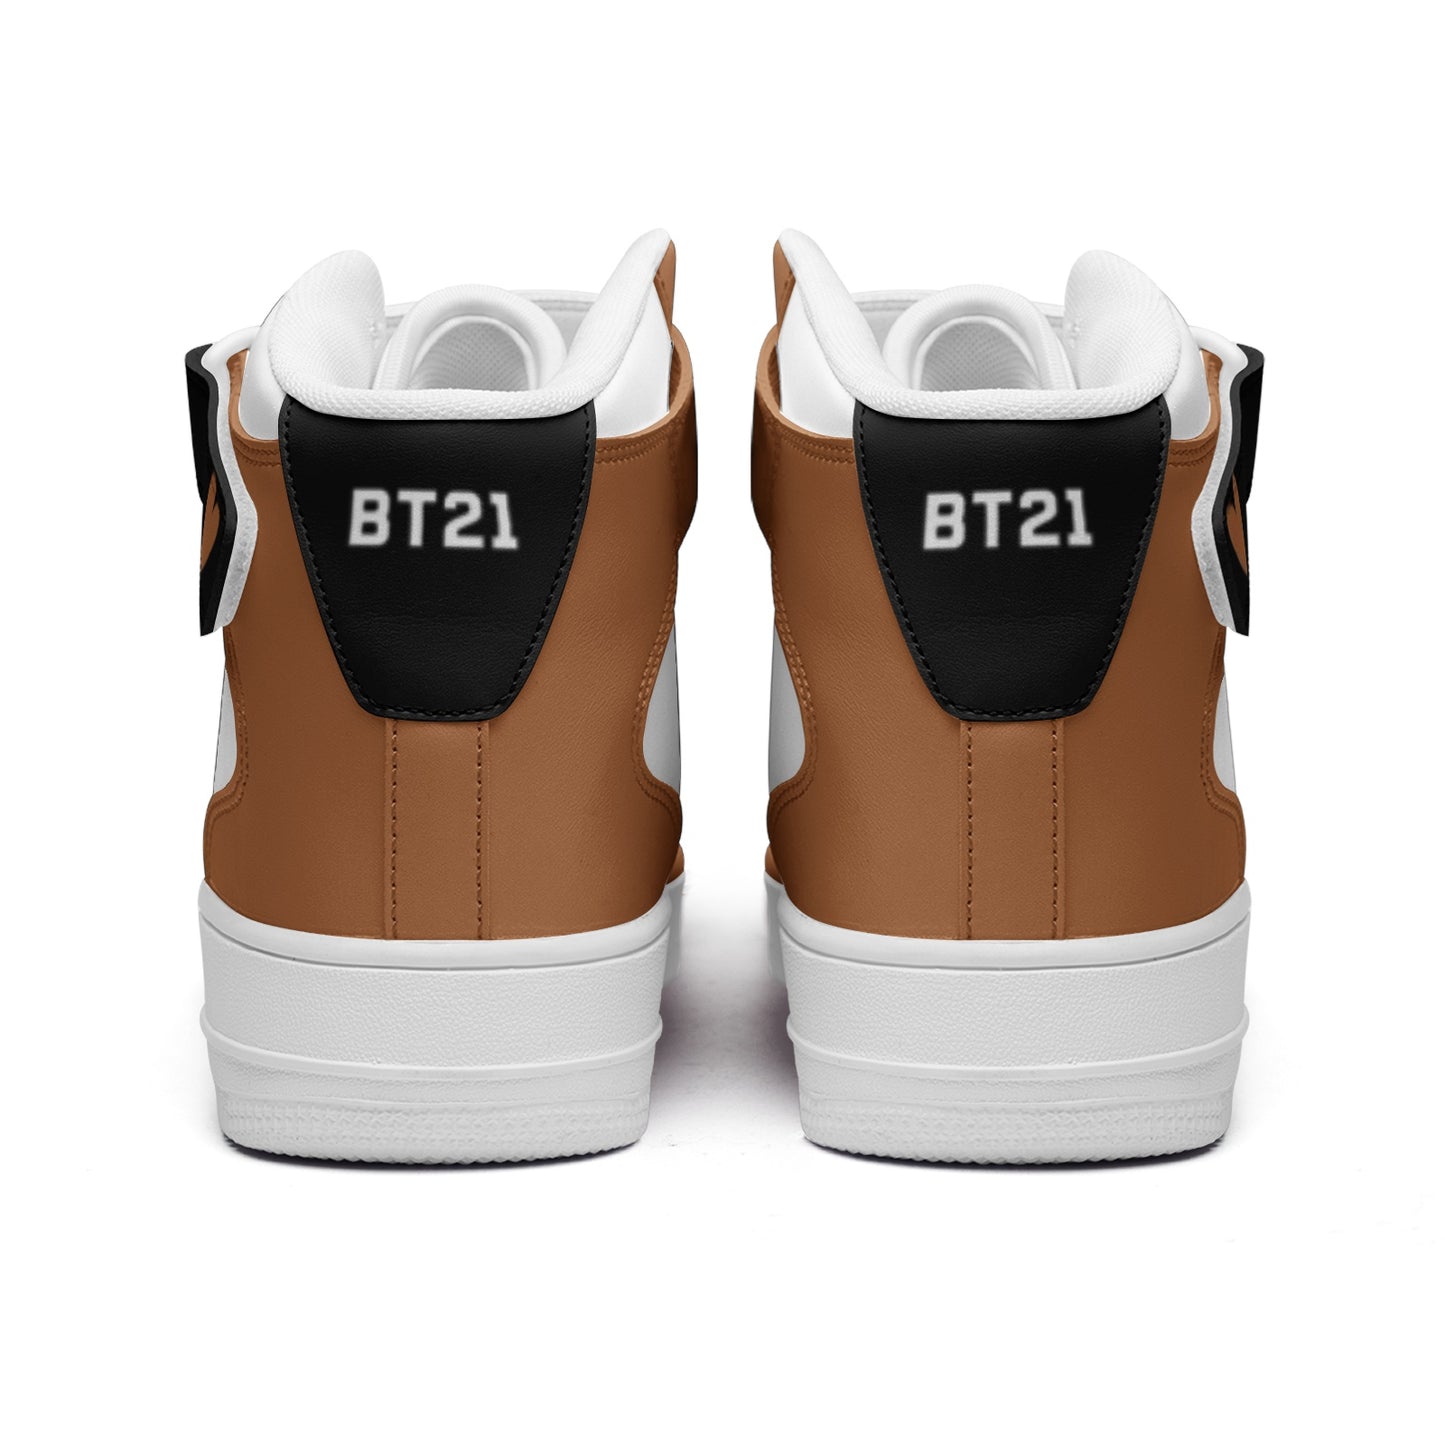 BT21 Shooky Unisex high Top Leather Sneakers